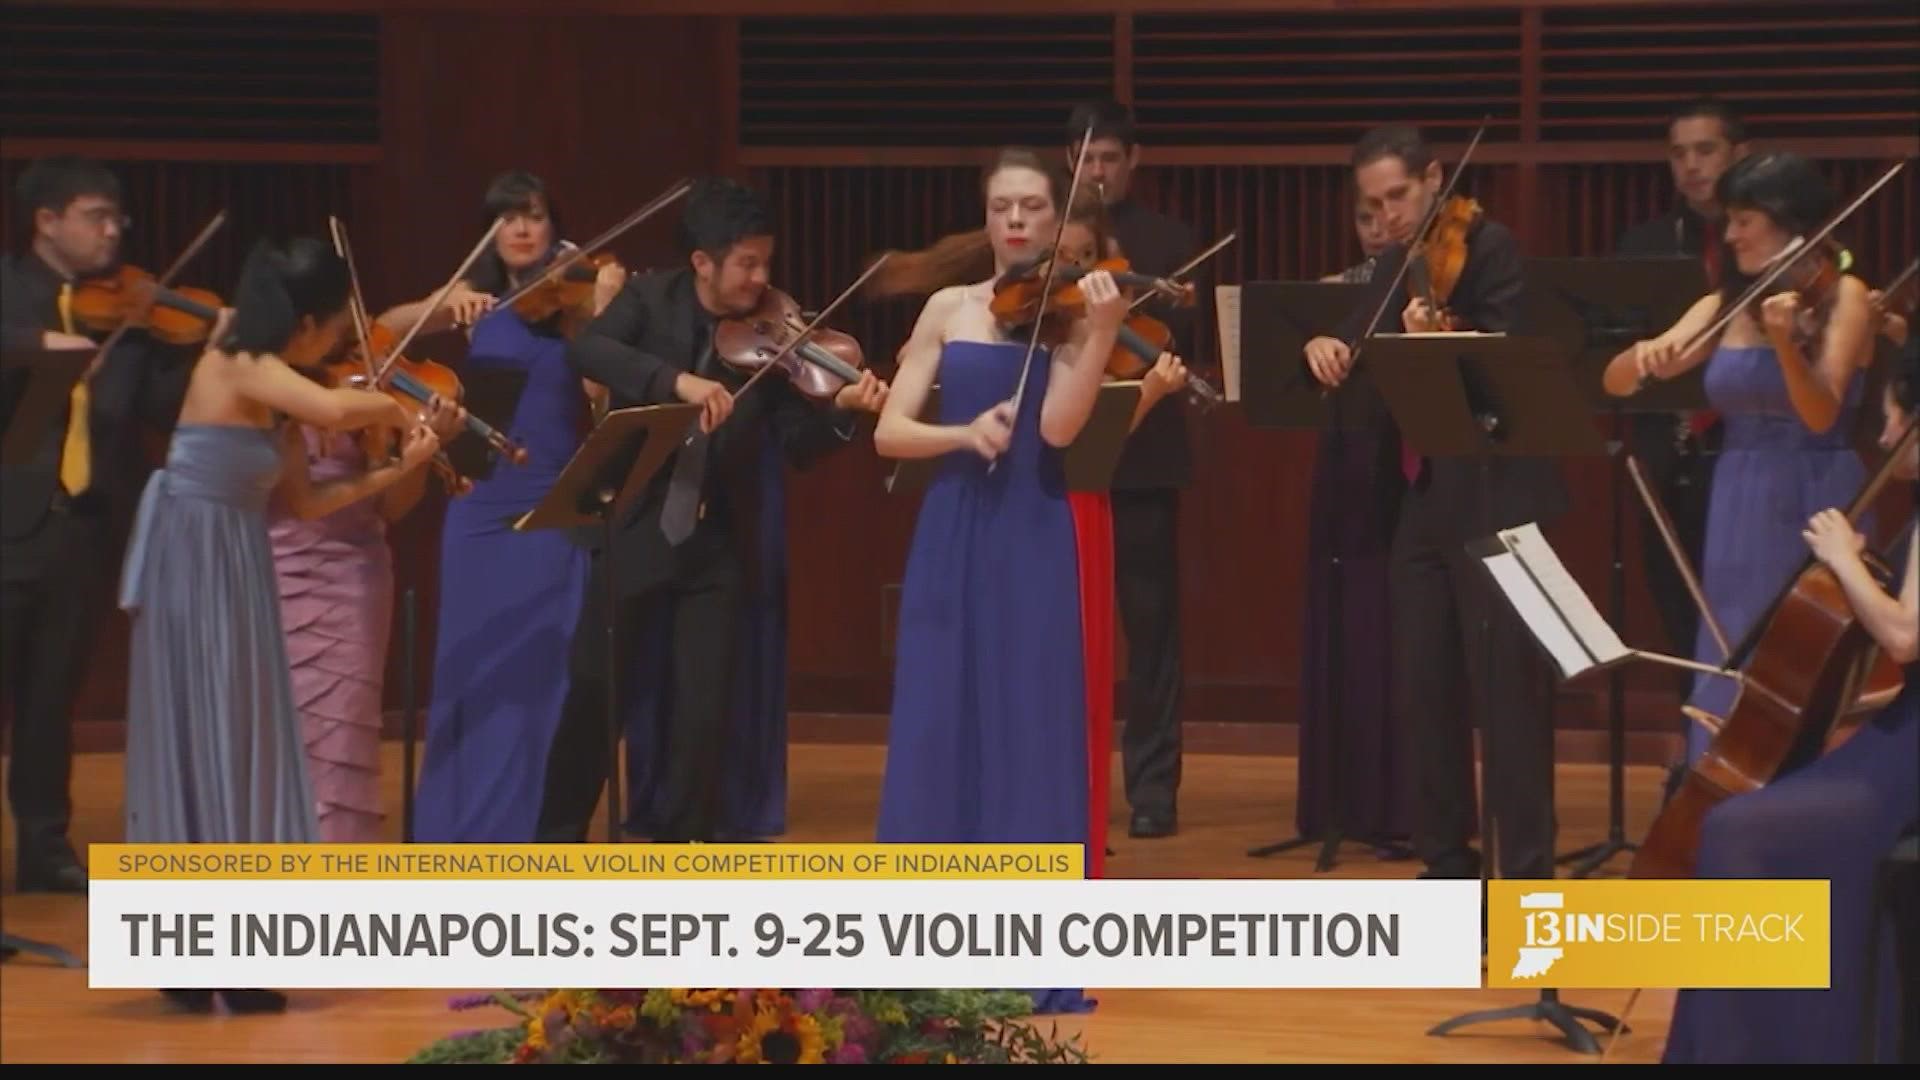 "The Indianapolis" originated in 1982 by the late Joseph Gingold, a violin professor at Indiana University. Experience 17 days of dazzling violin players.